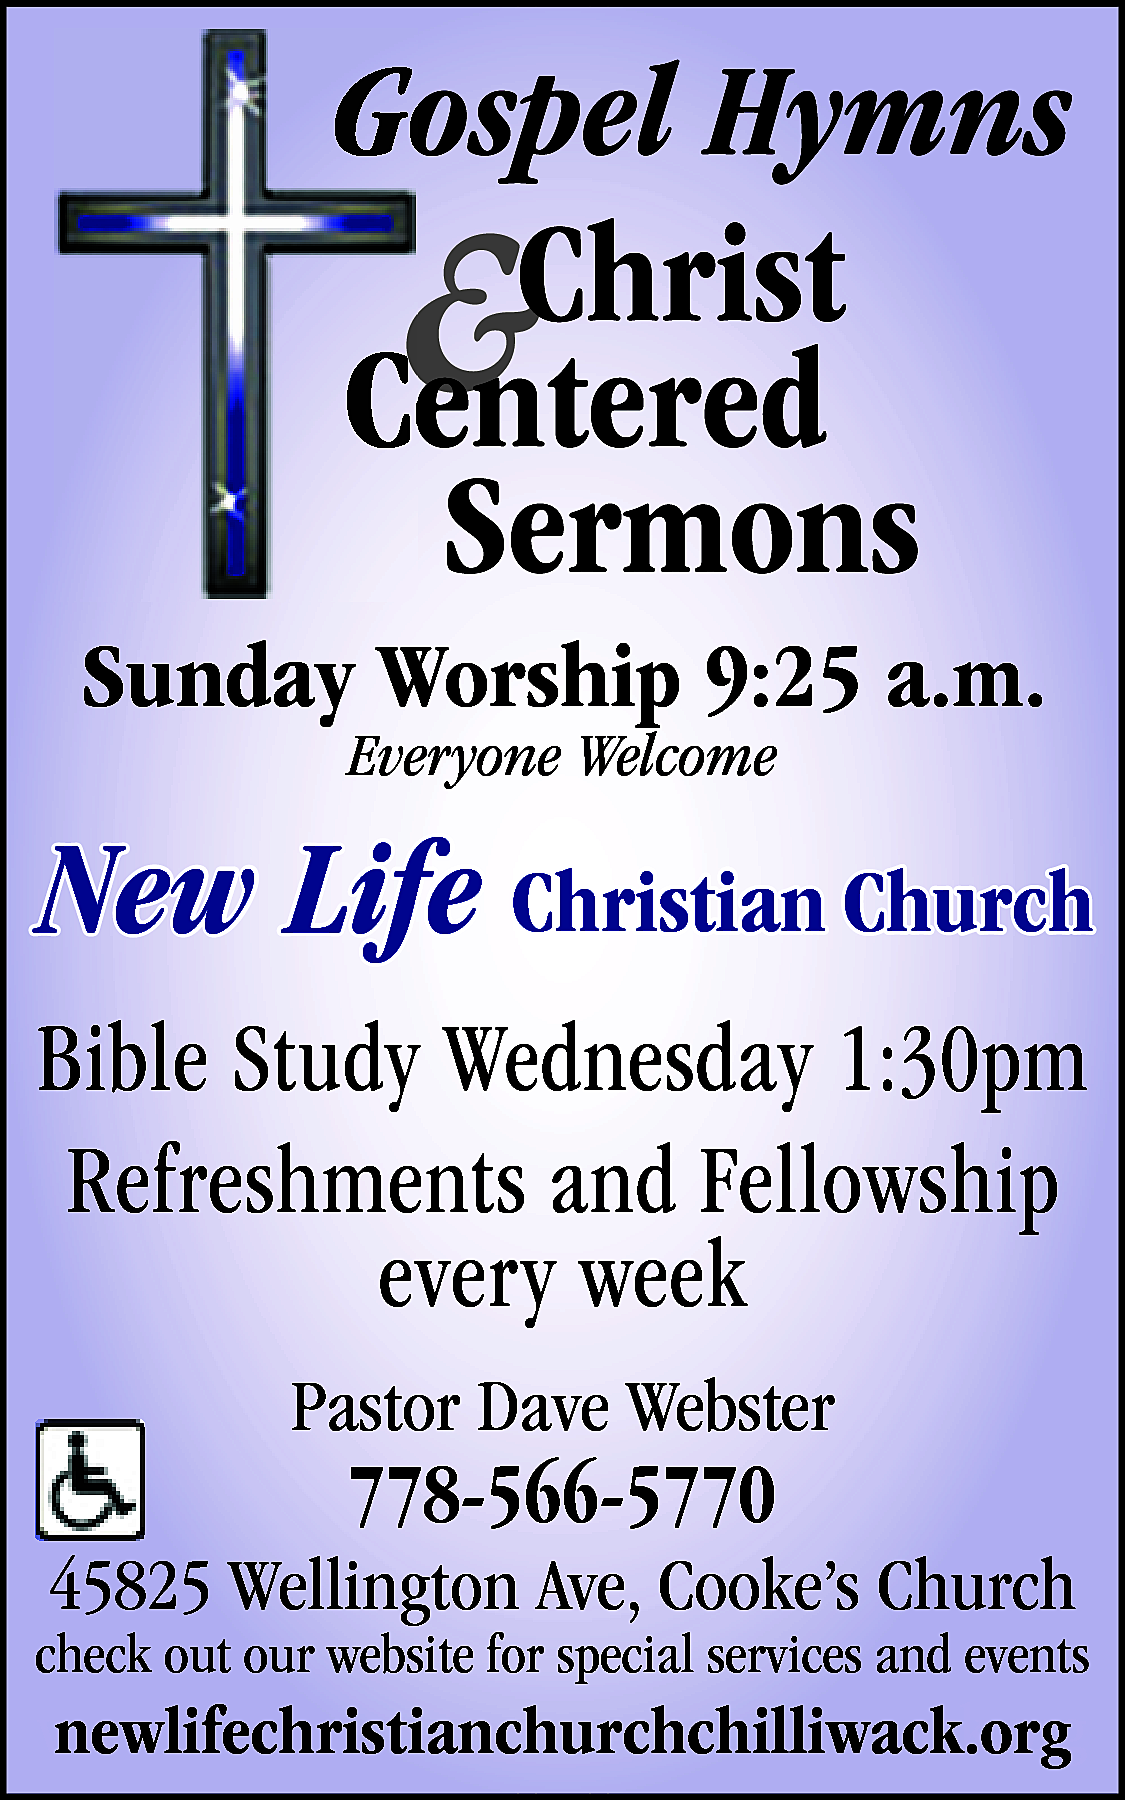 Sunday Worship 9:25 a.m. <br>Everyone  Sunday Worship 9:25 a.m.  Everyone Welcome    New Life Christian Church  Bible Study Wednesday 1:30pm  Refreshments and Fellowship  every week  Pastor Dave Webster    778-566-5770    45825 Wellington Ave, Cooke’s Church    check out our website for special services and events    www.newlifechristianchurchchilliwack.org  newlifechristianchurchchilliwack.org    